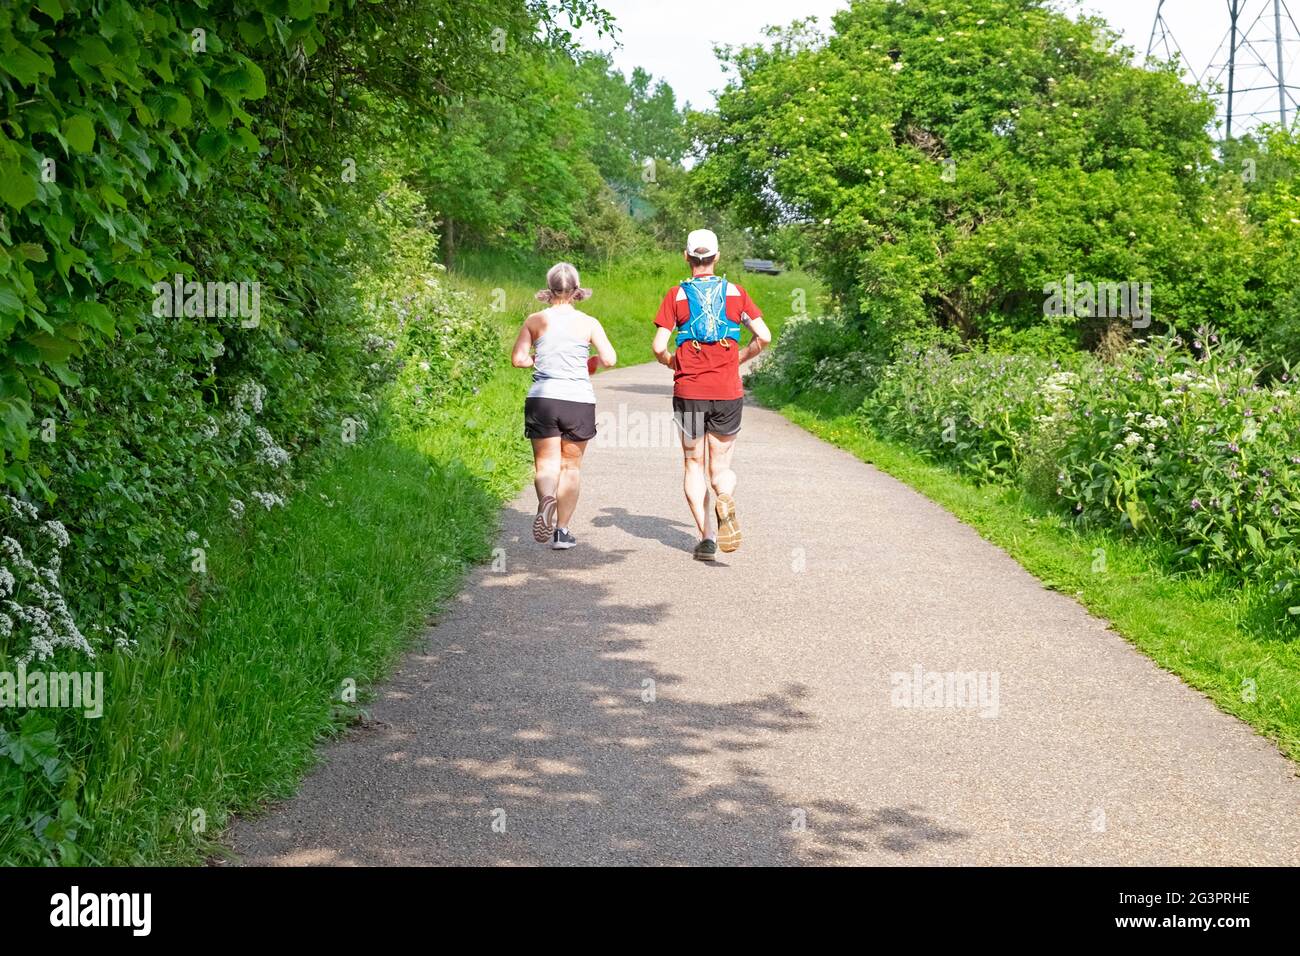 Two older people couple rear back view runners running jogging along Walthamstow Wetlands path in spring countryside 2021 London N17 UK KATHY DEWITT Stock Photo